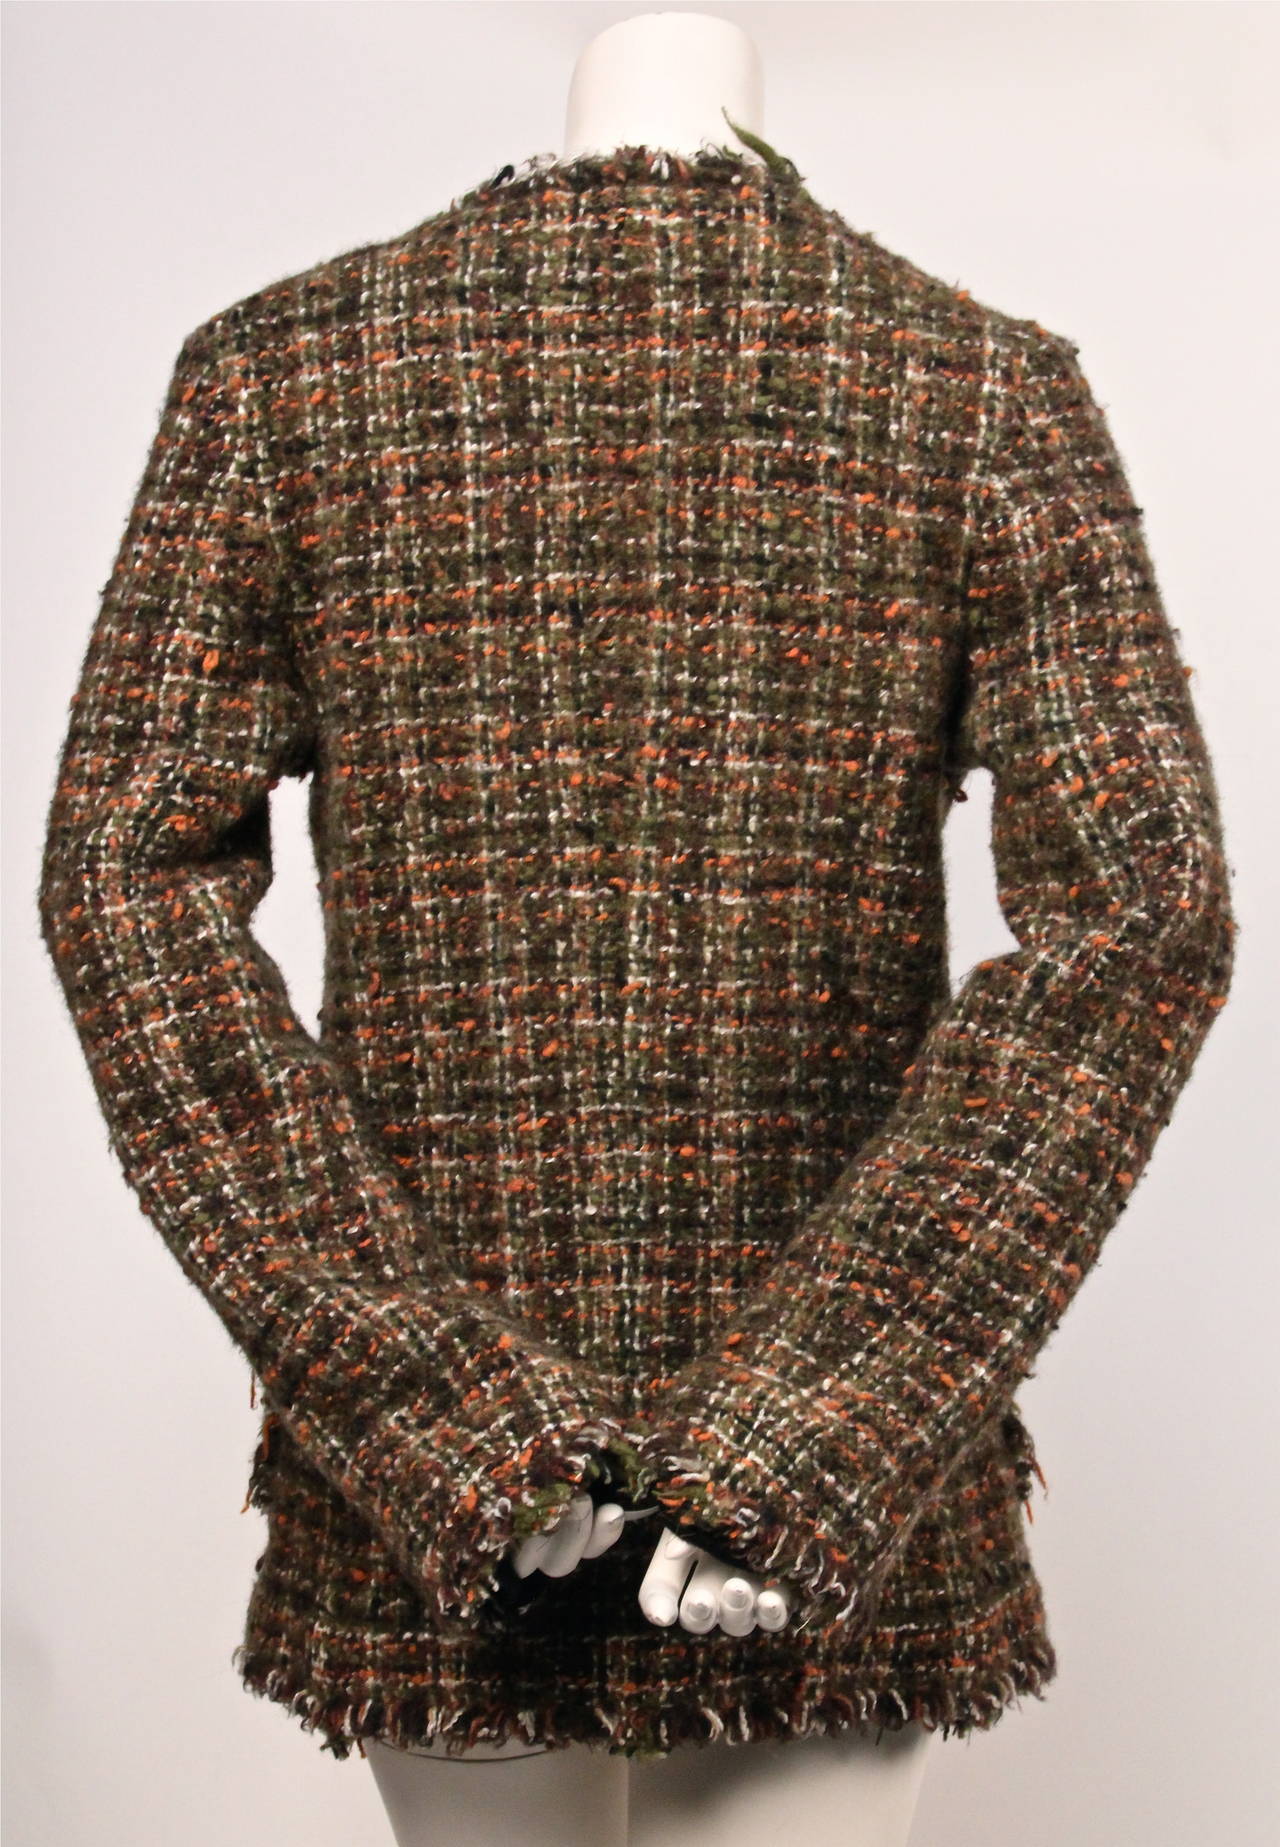 Brown, orange and moss tweed coat with raw edges from Junya Watanabe as seen on the runway Fall 2003. Size M. Approximate measurements are as follows: shoulder 16